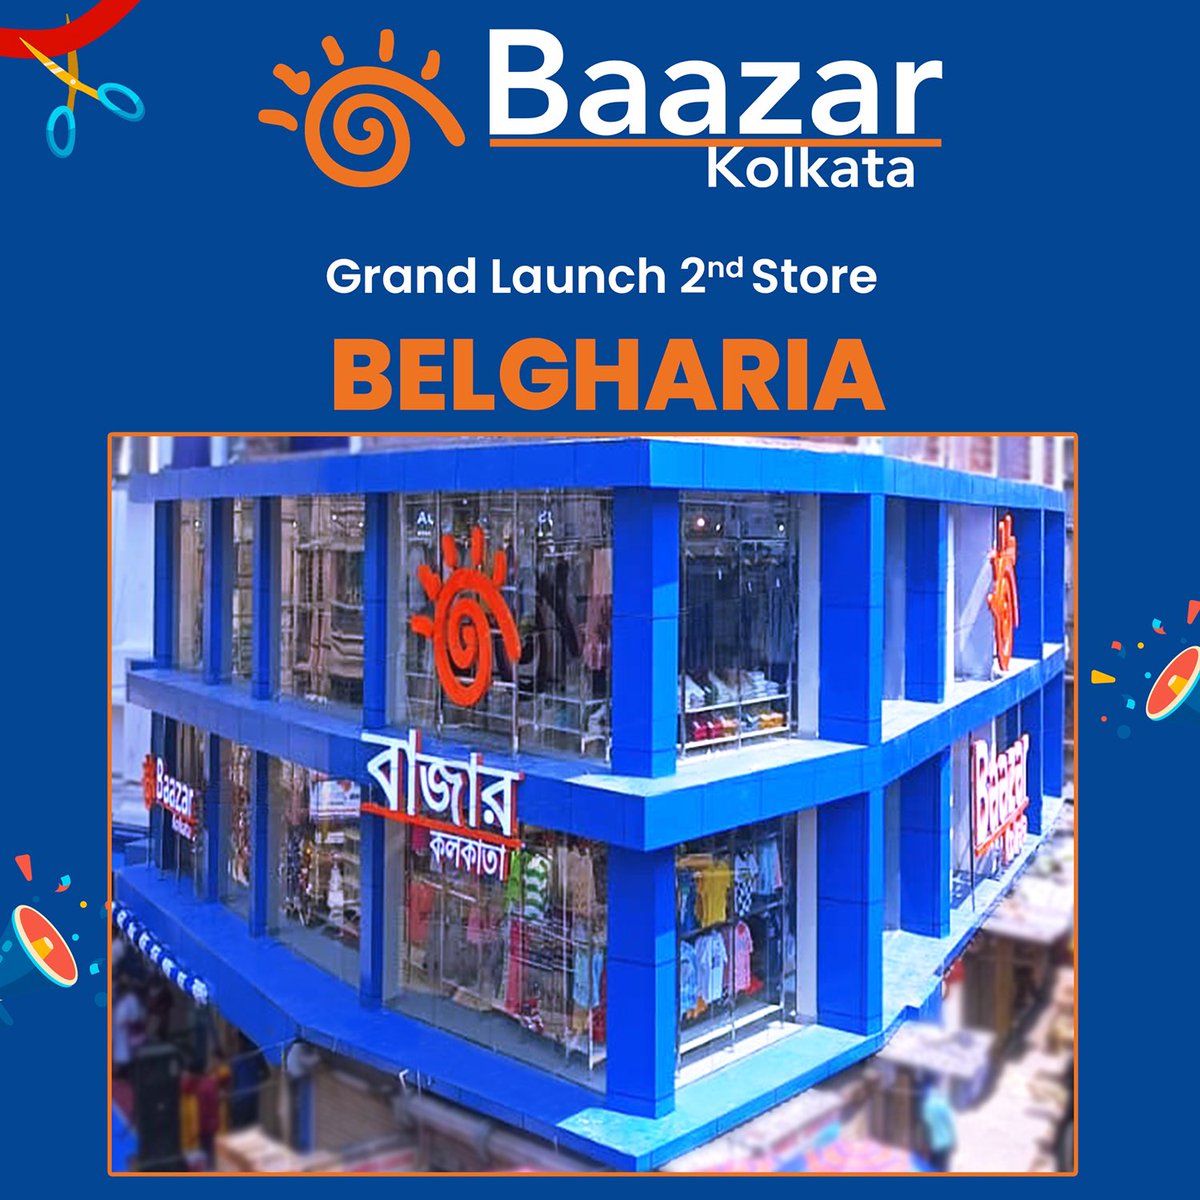 Baazar Kolkata is ecstatic to announce the launch of our 2nd Store in Belgharia and our 25th Store in the City of Joy, Kolkata adding incredible depth to our network of 161 stores across Bharat. #BaazarKolkata #storeopening #newstore #newstoreopening #newstorealert #newstores